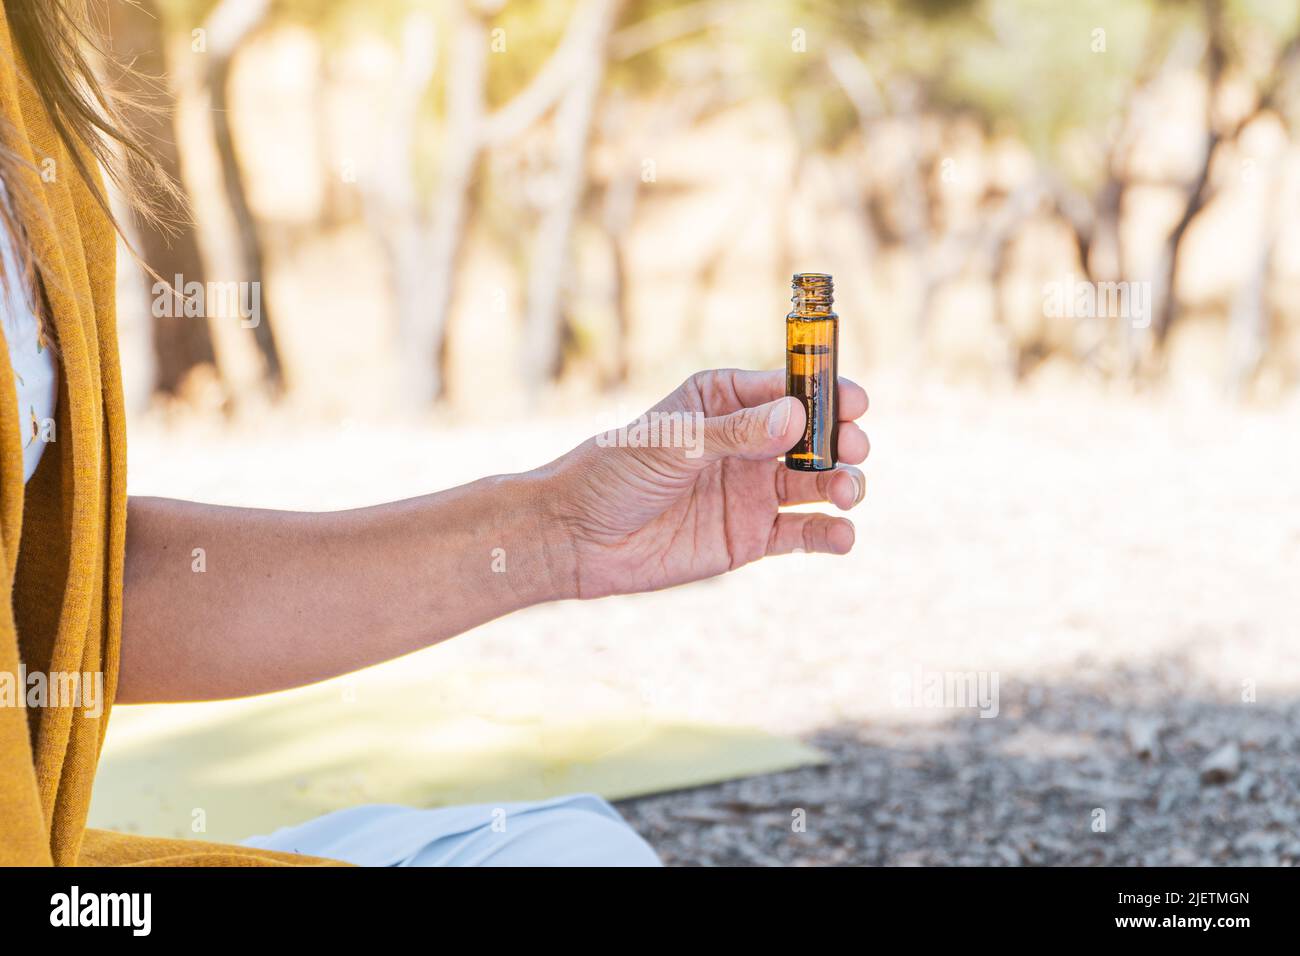 woman testing aromatherpy oils on a summertime mindfulness ritual. healthy life concept. summer solstice. Stock Photo